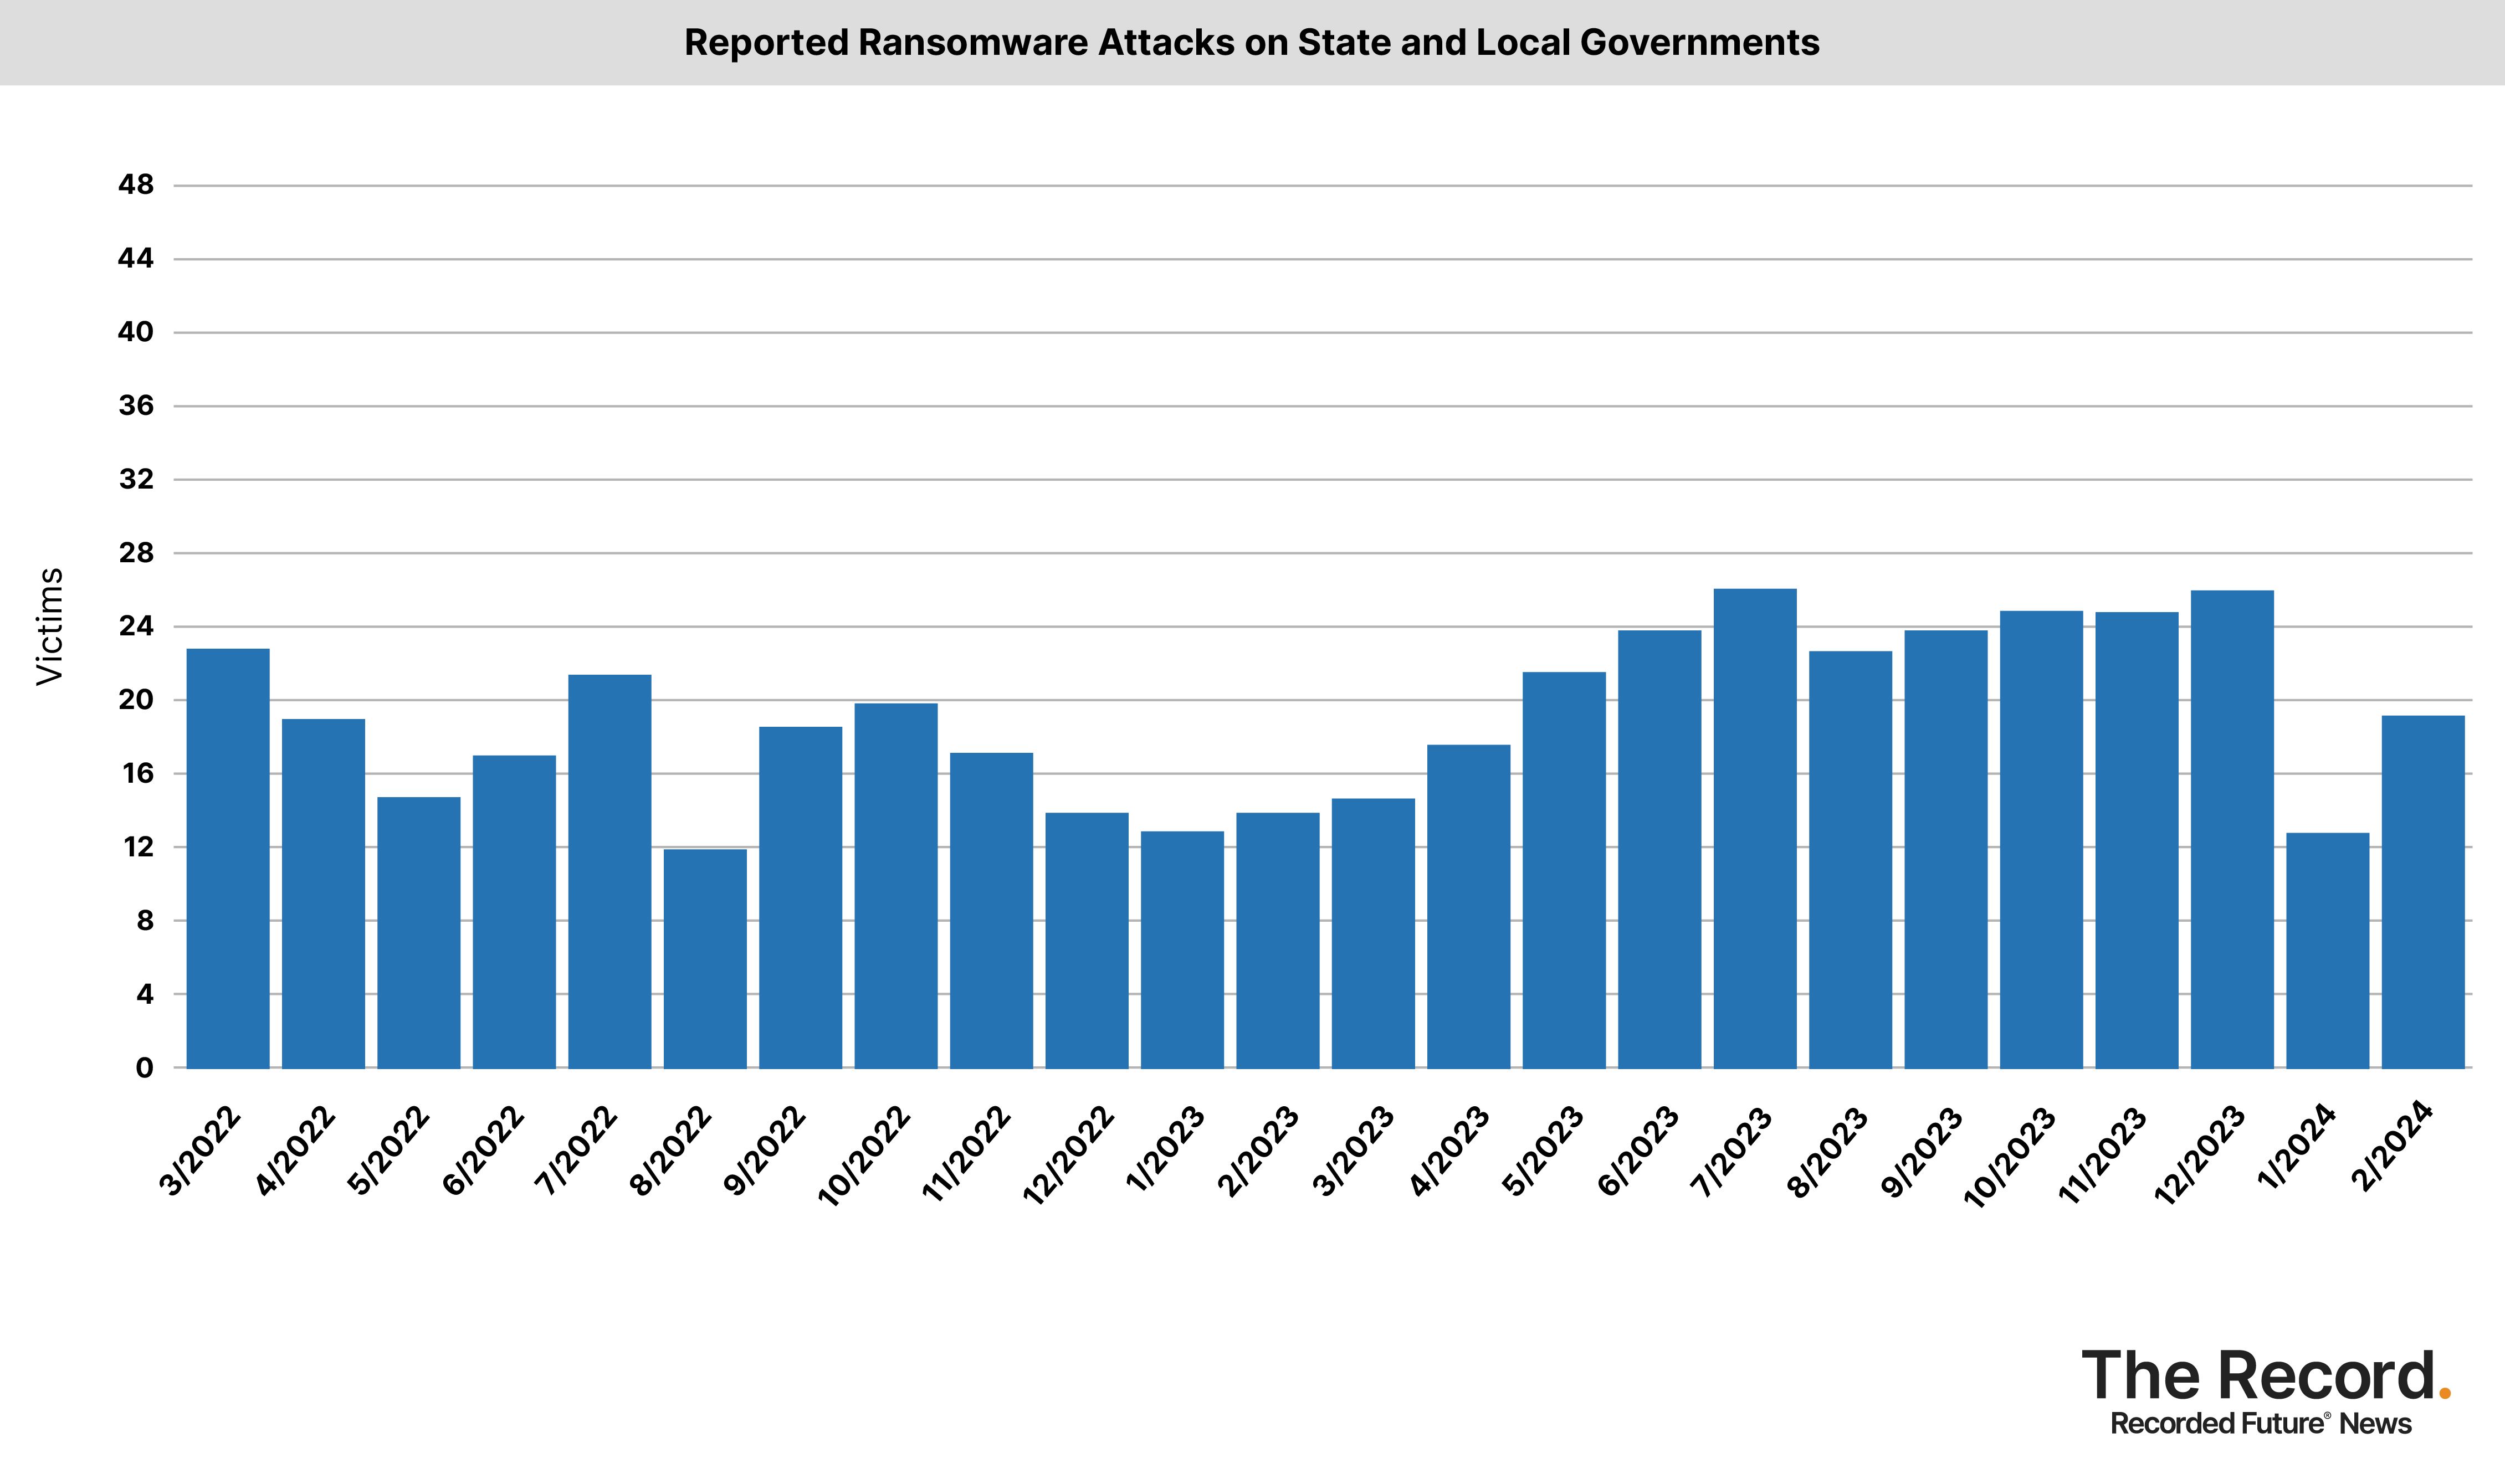 2024_0308 - Ransomware Tracker_Reported Ransomware Attacks on State and Local Governments.jpg